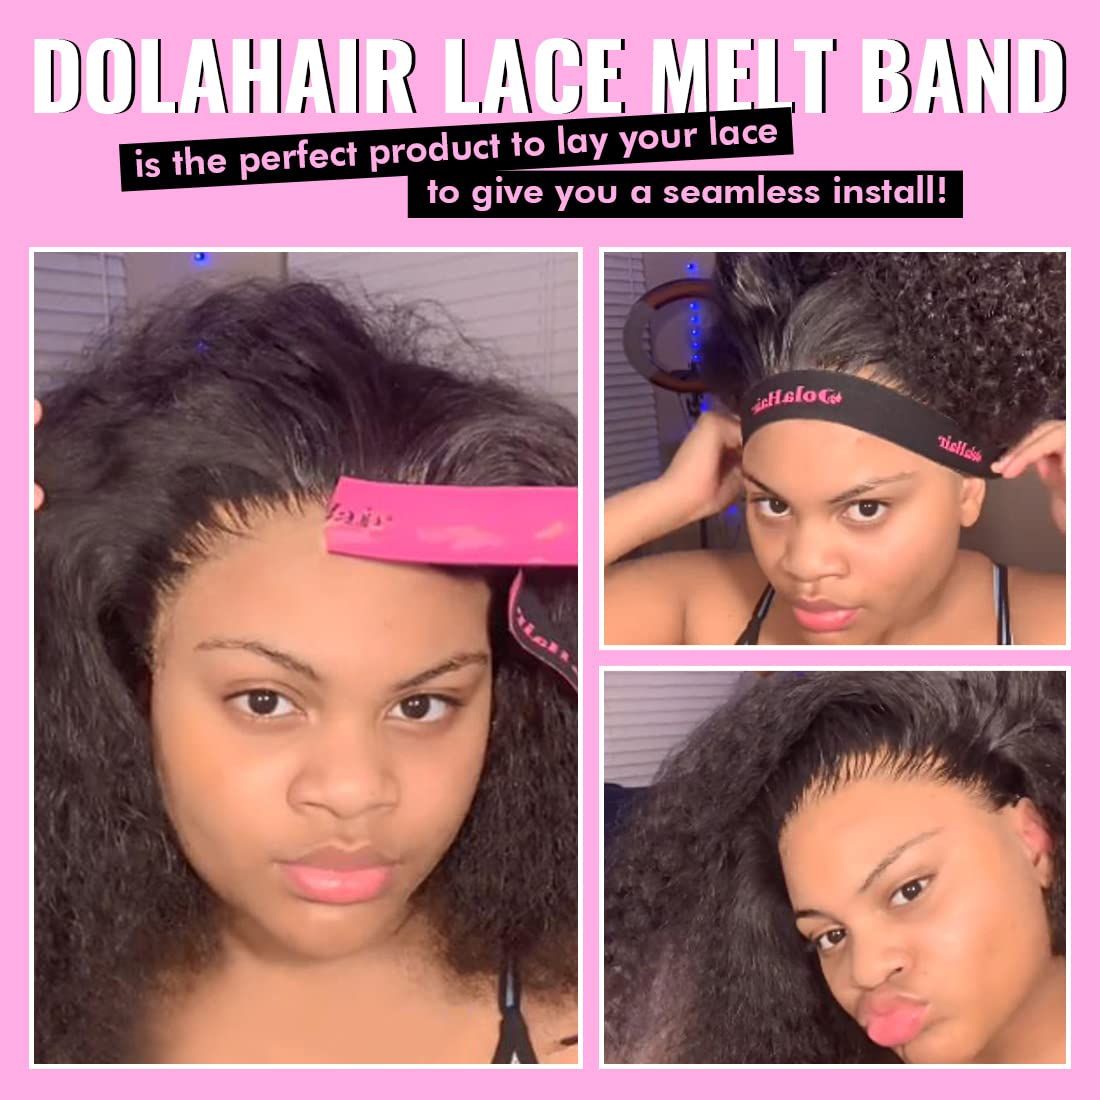 Dolahair Lace Tint Spray for Wigs Melt, Medium Brown Wig Tint Lace Spray Lace Melting Foam Lace Tint Mousse for Wigs Melt Lace Wigs Melting with 2 Pcs Lace Melting Band, Elastic Bands for Wigs